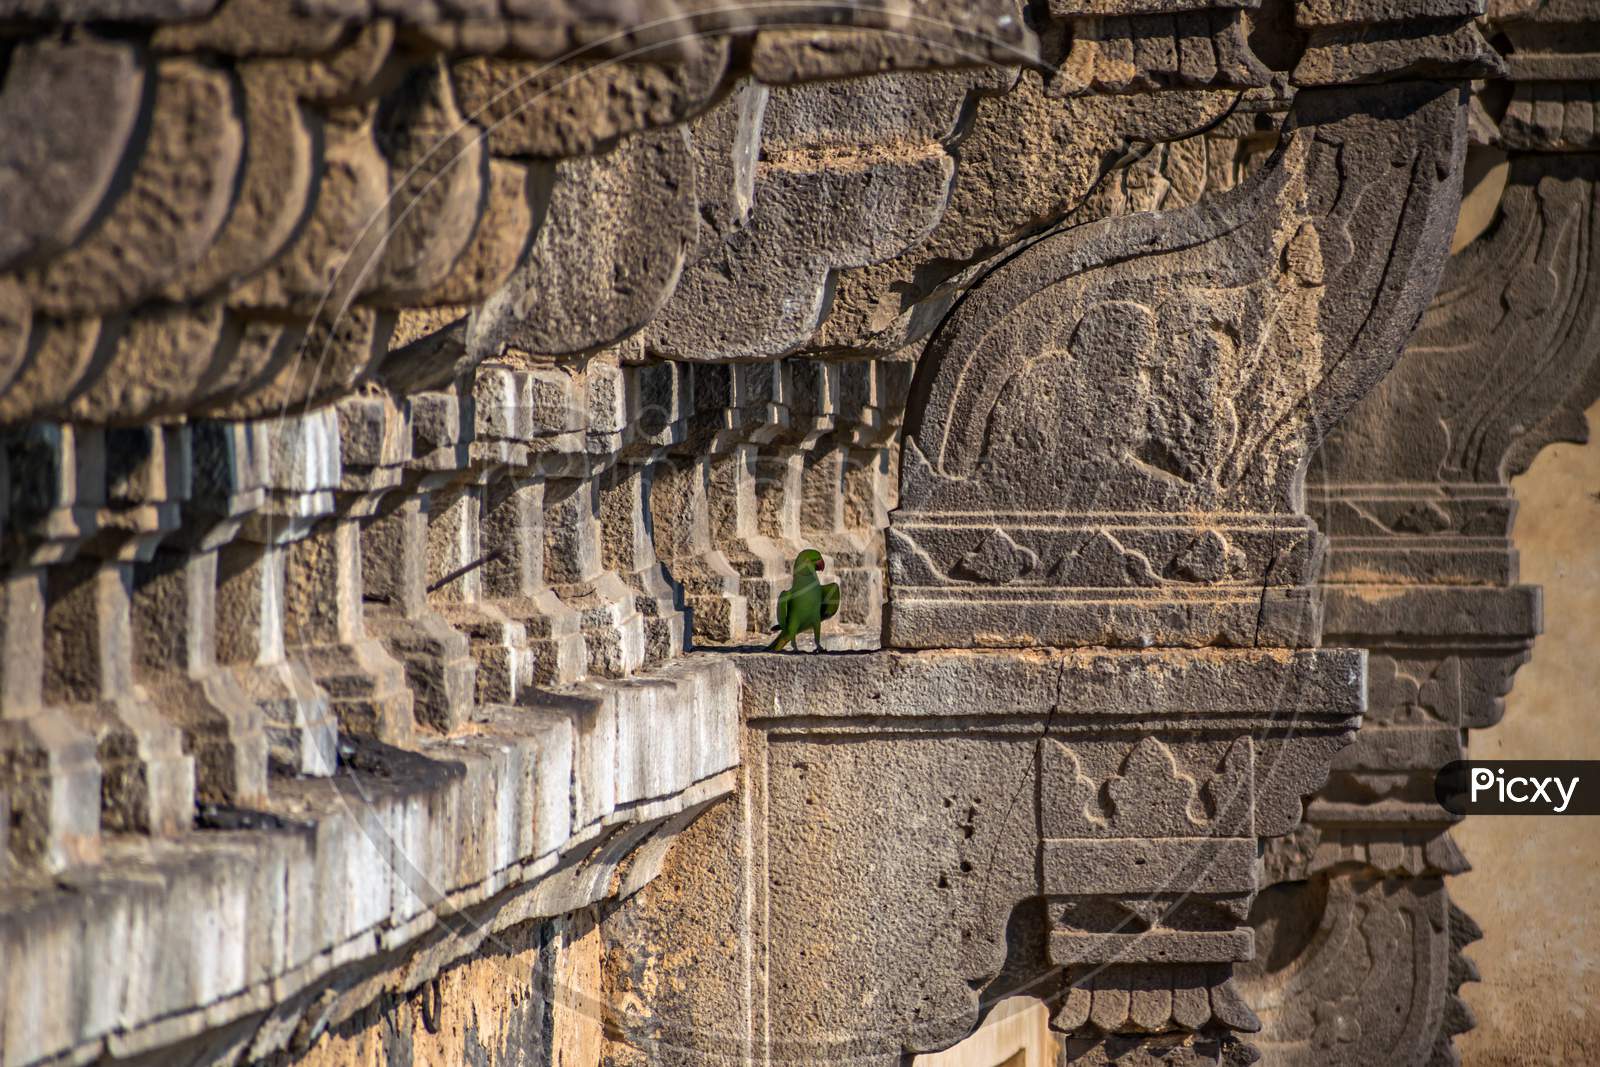 A Parrot Sitting On The Side Wall Of Heritage Structure Of Gol Ghumbaj.